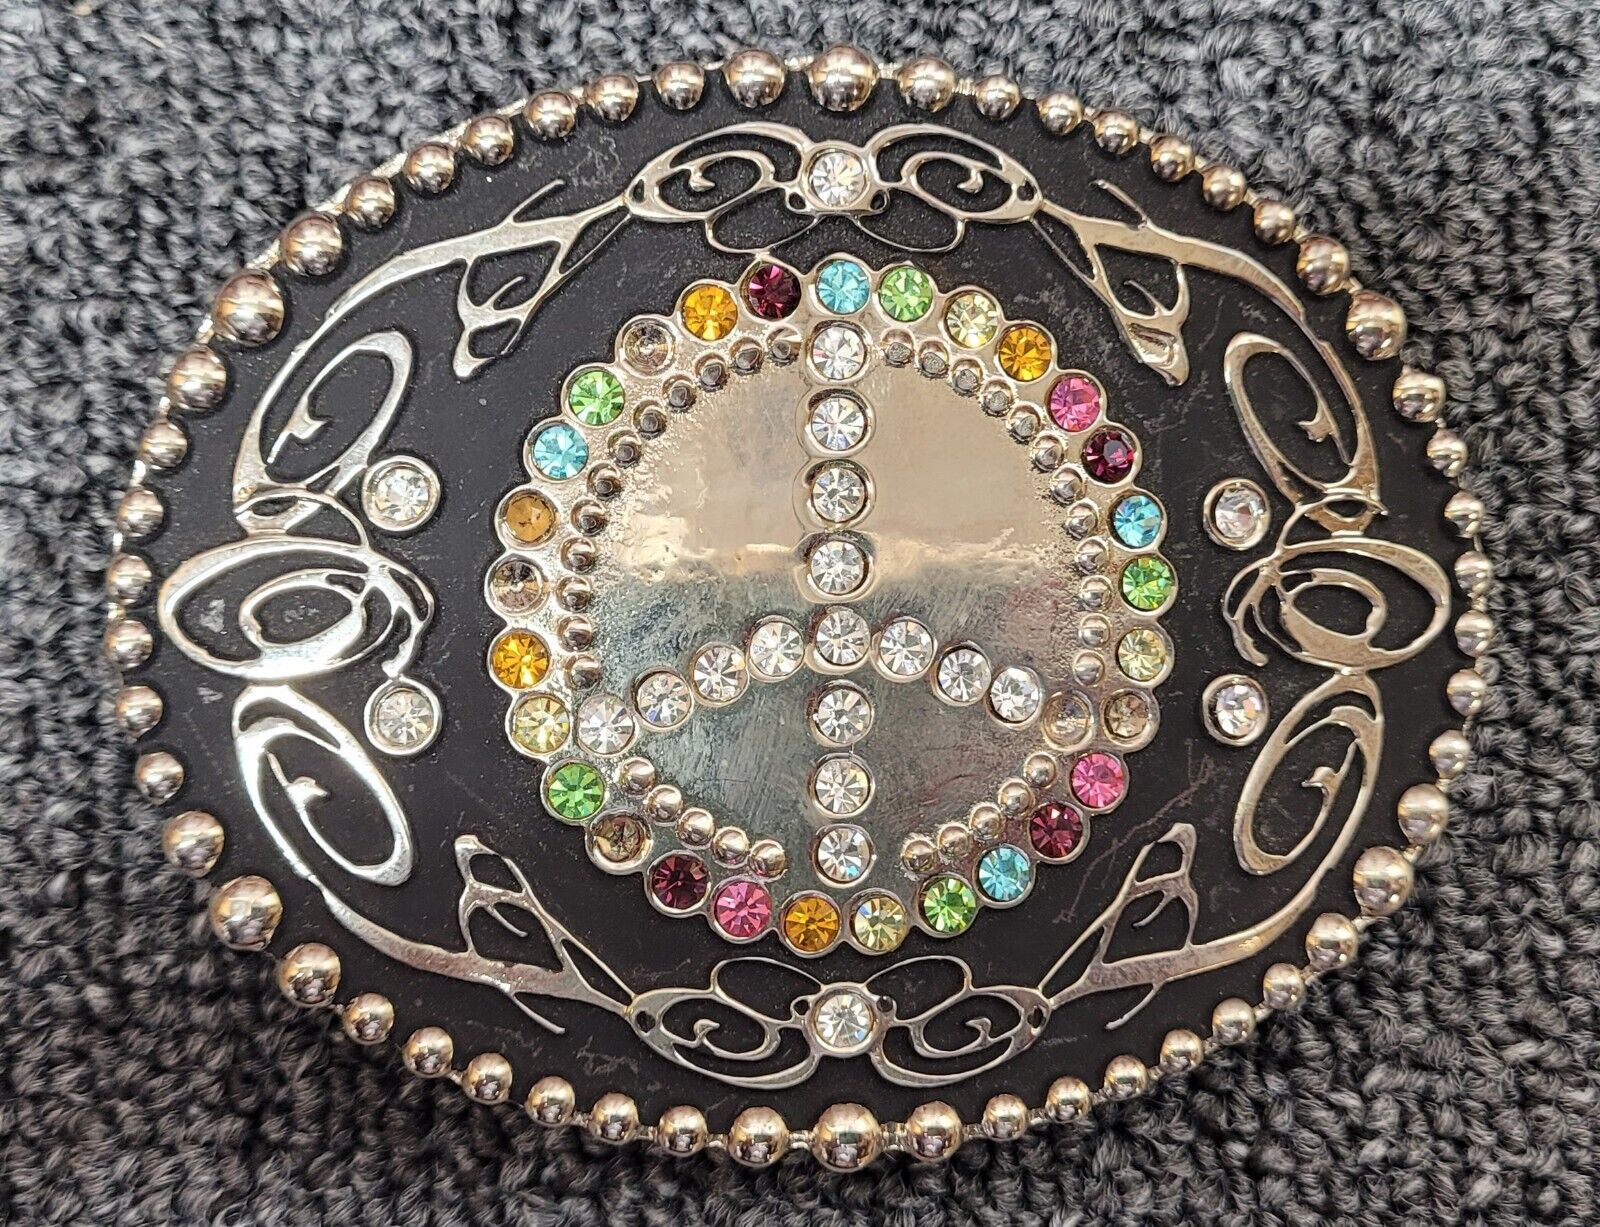 Rare Western Edge Peace Sign Belt Buckle with Colorful Stones by Taylor Brands.